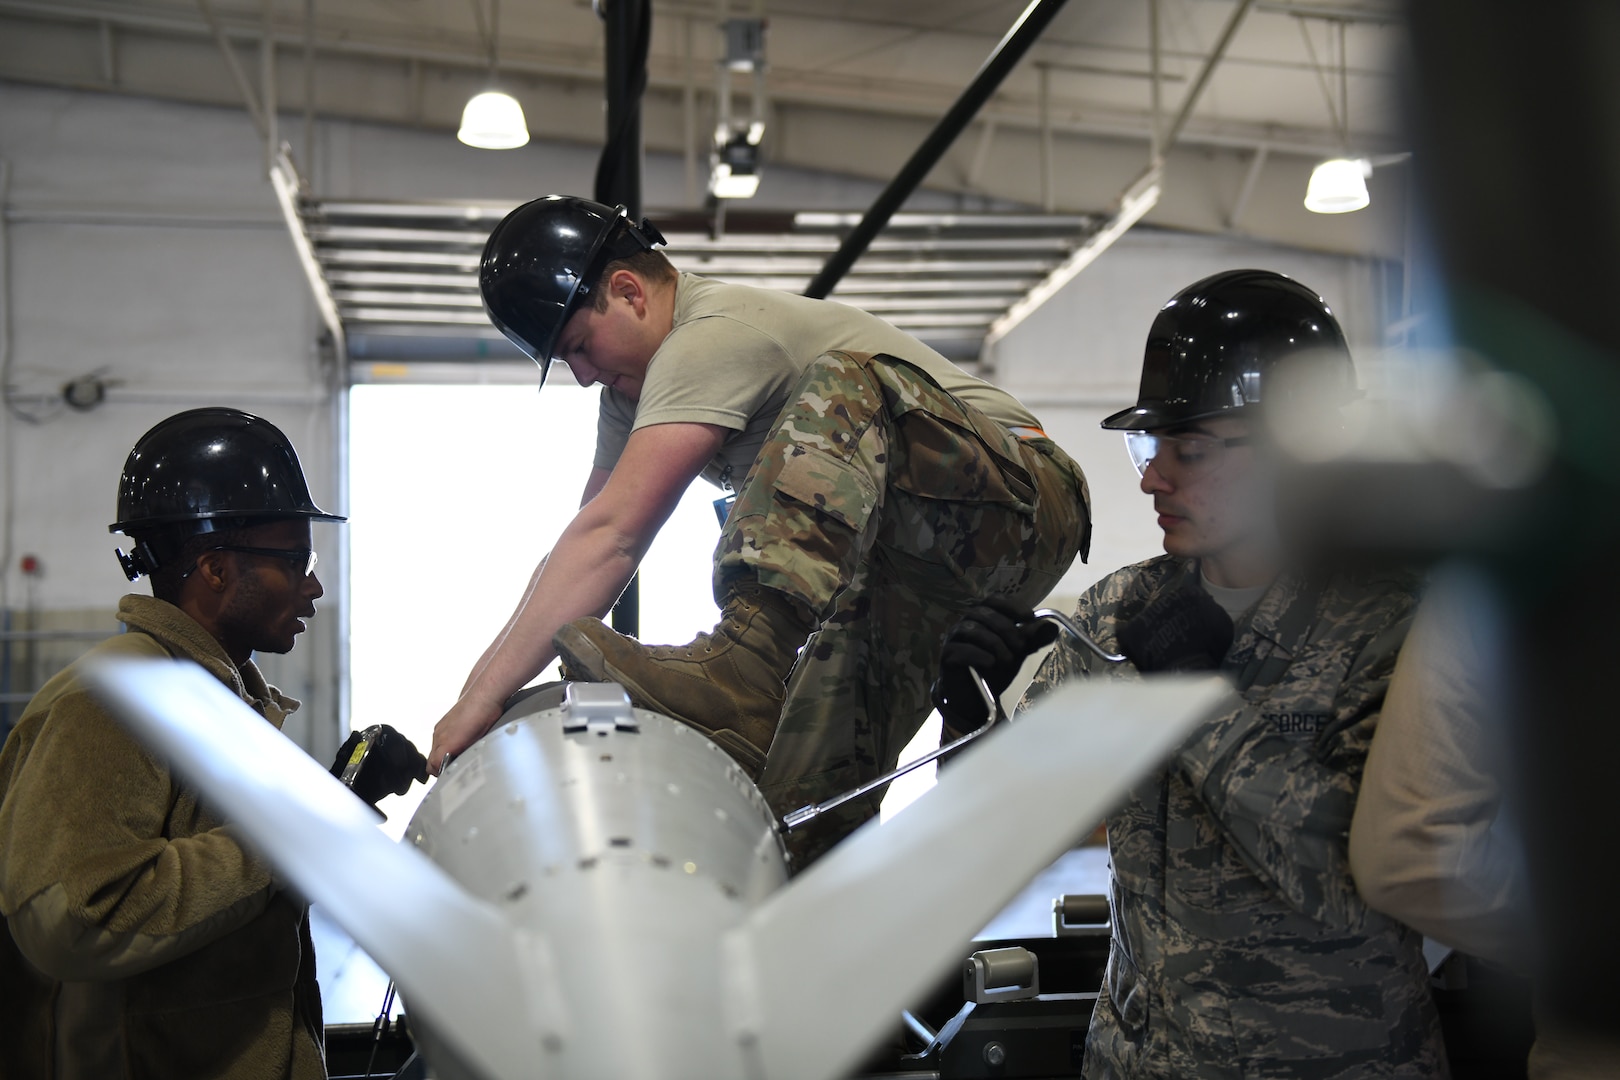 Airmen from the 28th Munitions Squadron separate a Joint Direct Attack Munition (JDAM) from its tail kit during a U.S. Strategic Command exercise on Ellsworth Air Force Base, S.D., Oct. 21, 2019. Global Thunder is an annual command and control exercise that provides training opportunities for all of U.S. Strategic Command’s mission areas, tests joint and field training operations, and has a specific focus on nuclear readiness. (U.S. Air Force photo by Airman 1st Class Christina Bennett)